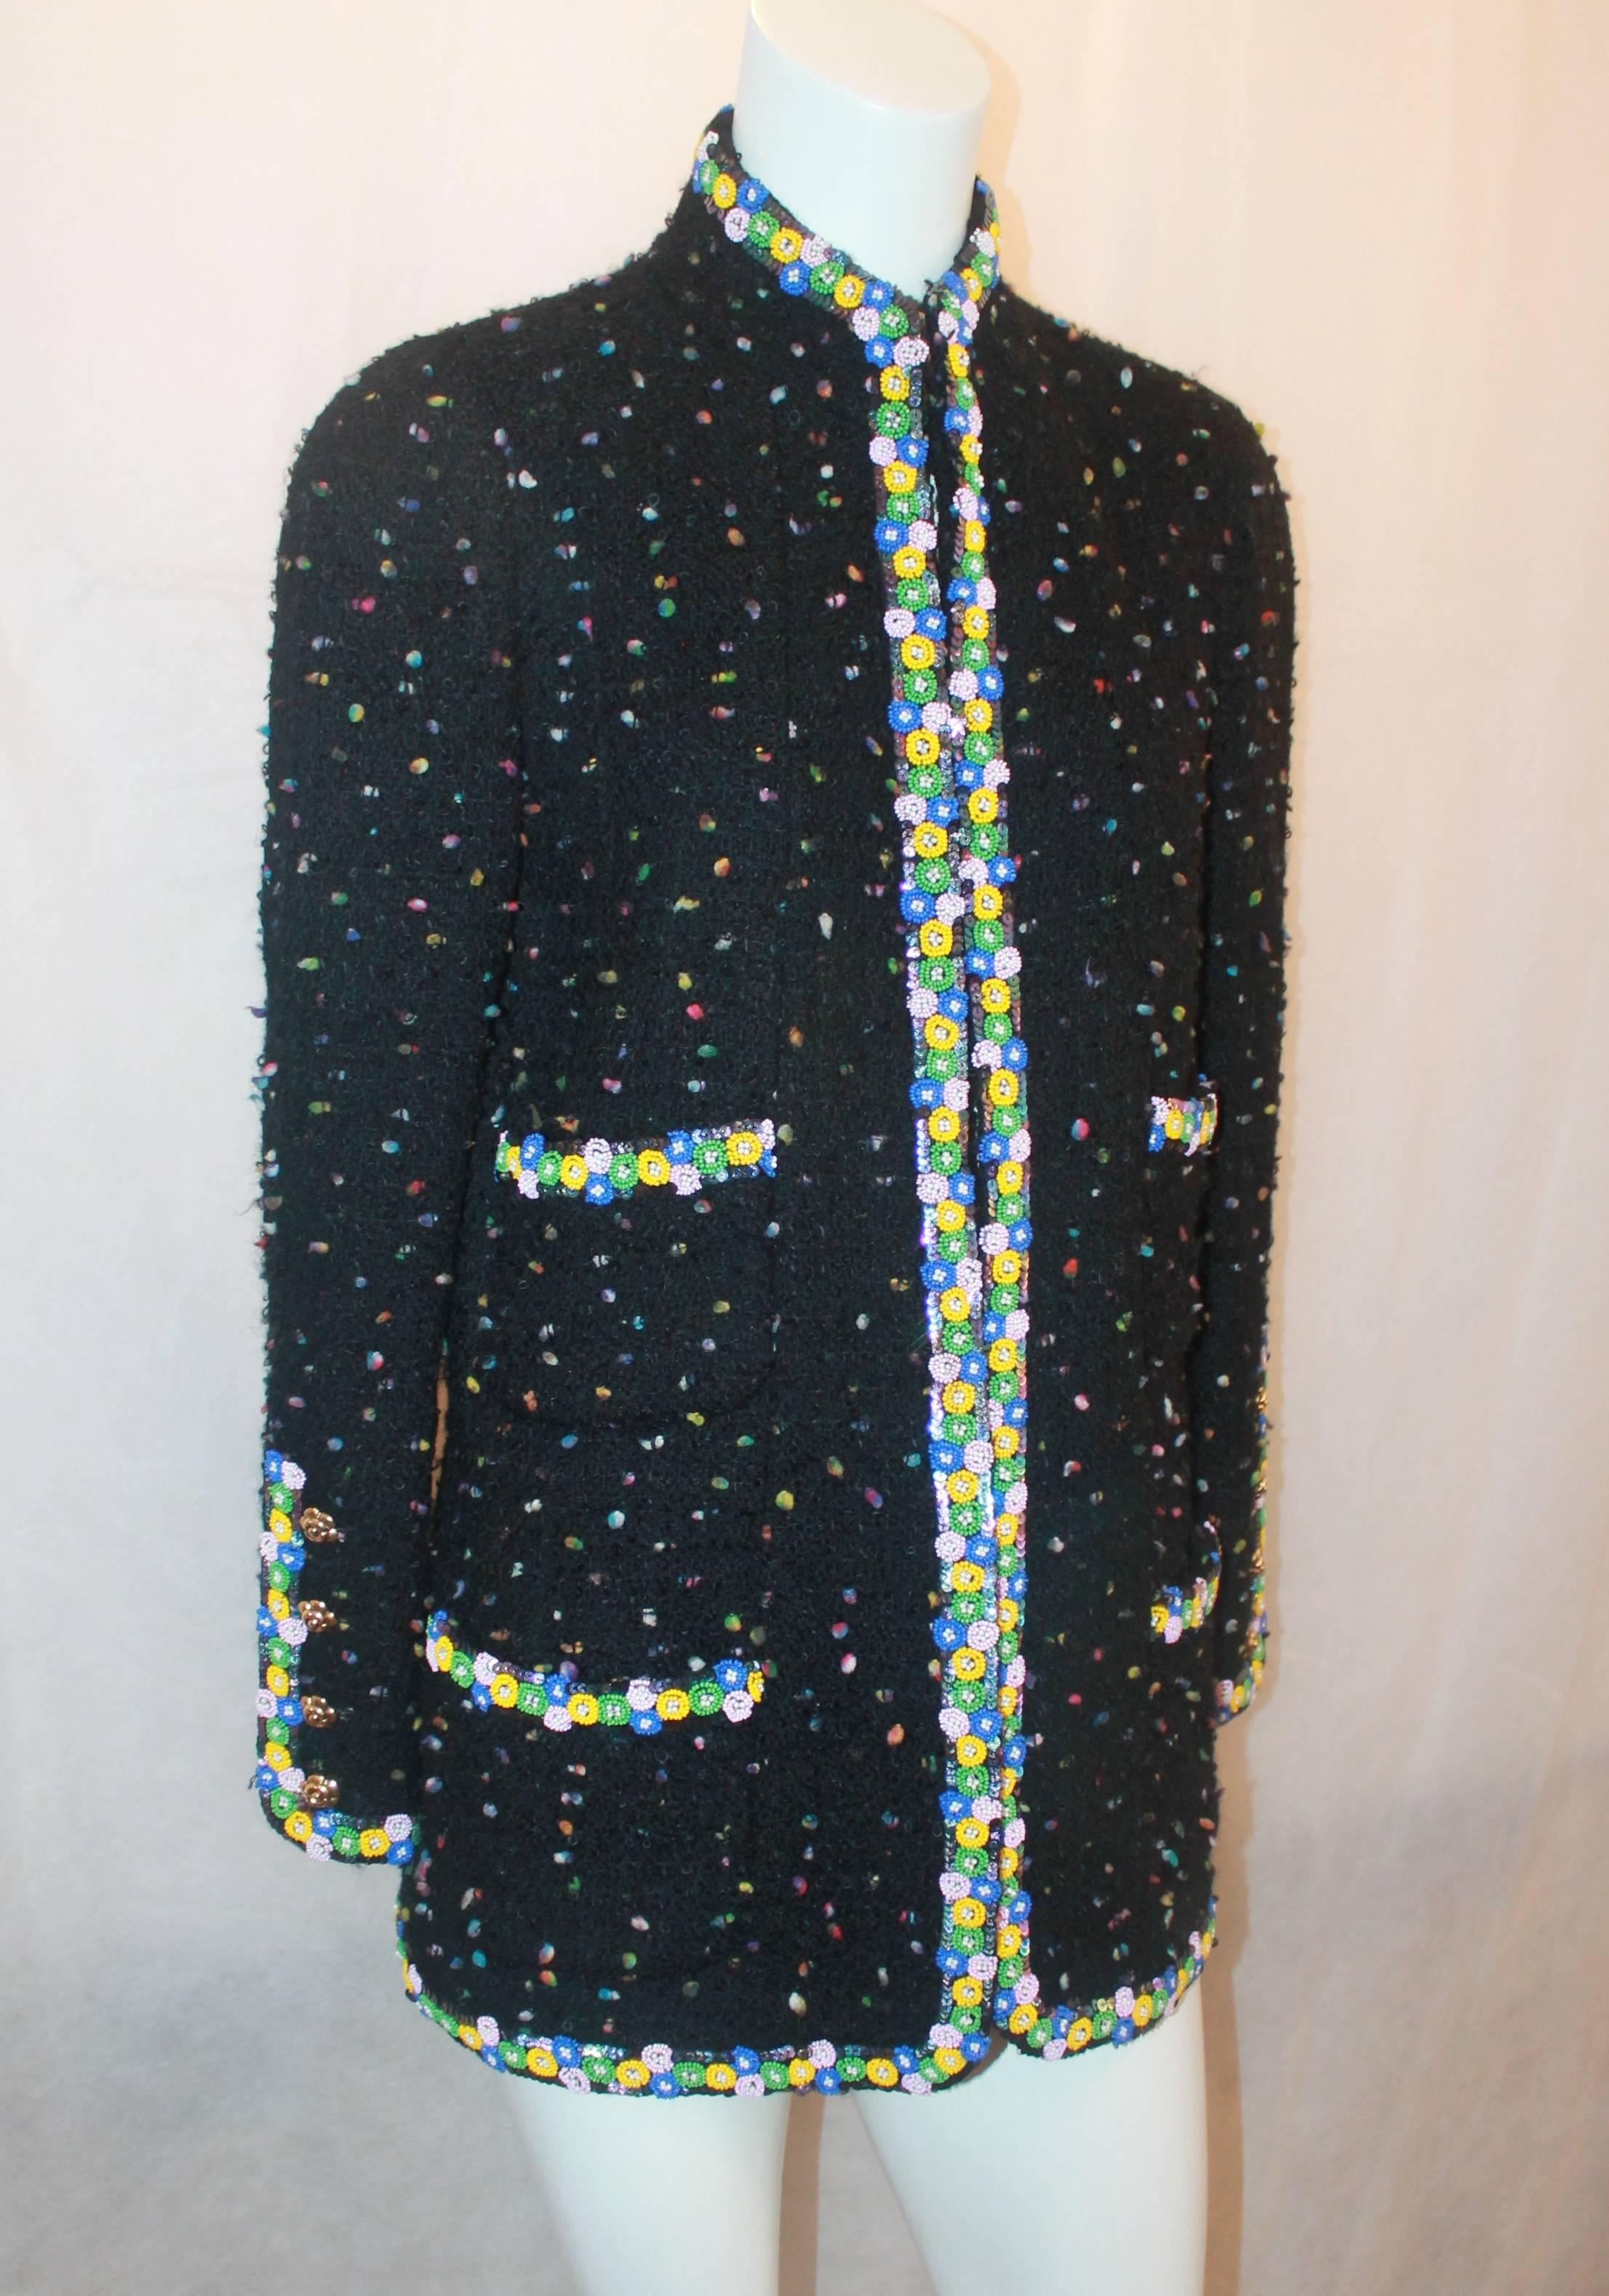 Chanel Vintage Black & Multicolor Long Jacket with Bead Trim - M - 1980's. This jacket is in good vintage condition. There is general wear to it and there is an area on the neck beading were it has start to come loose (image 5). The floral beaded